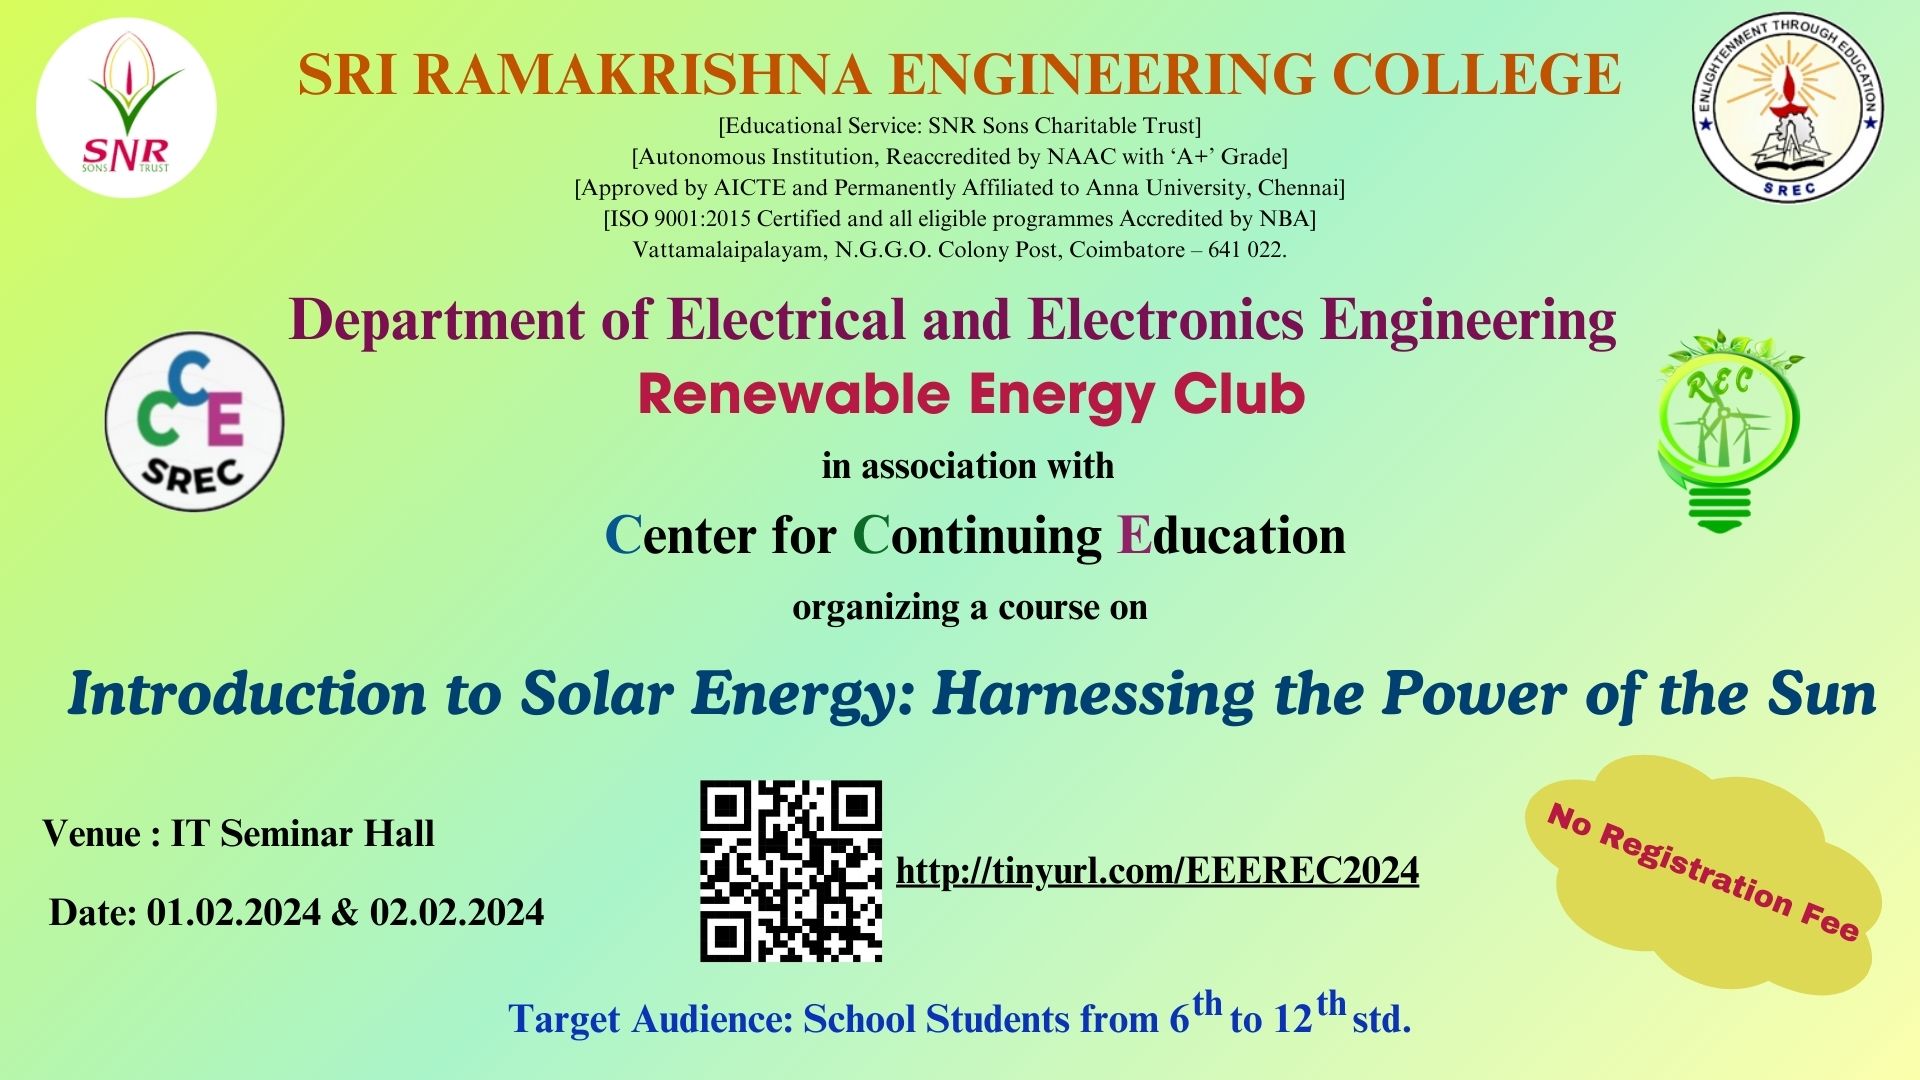 Introduction to Solar Energy: Harnessing the Power of the Sun 2024